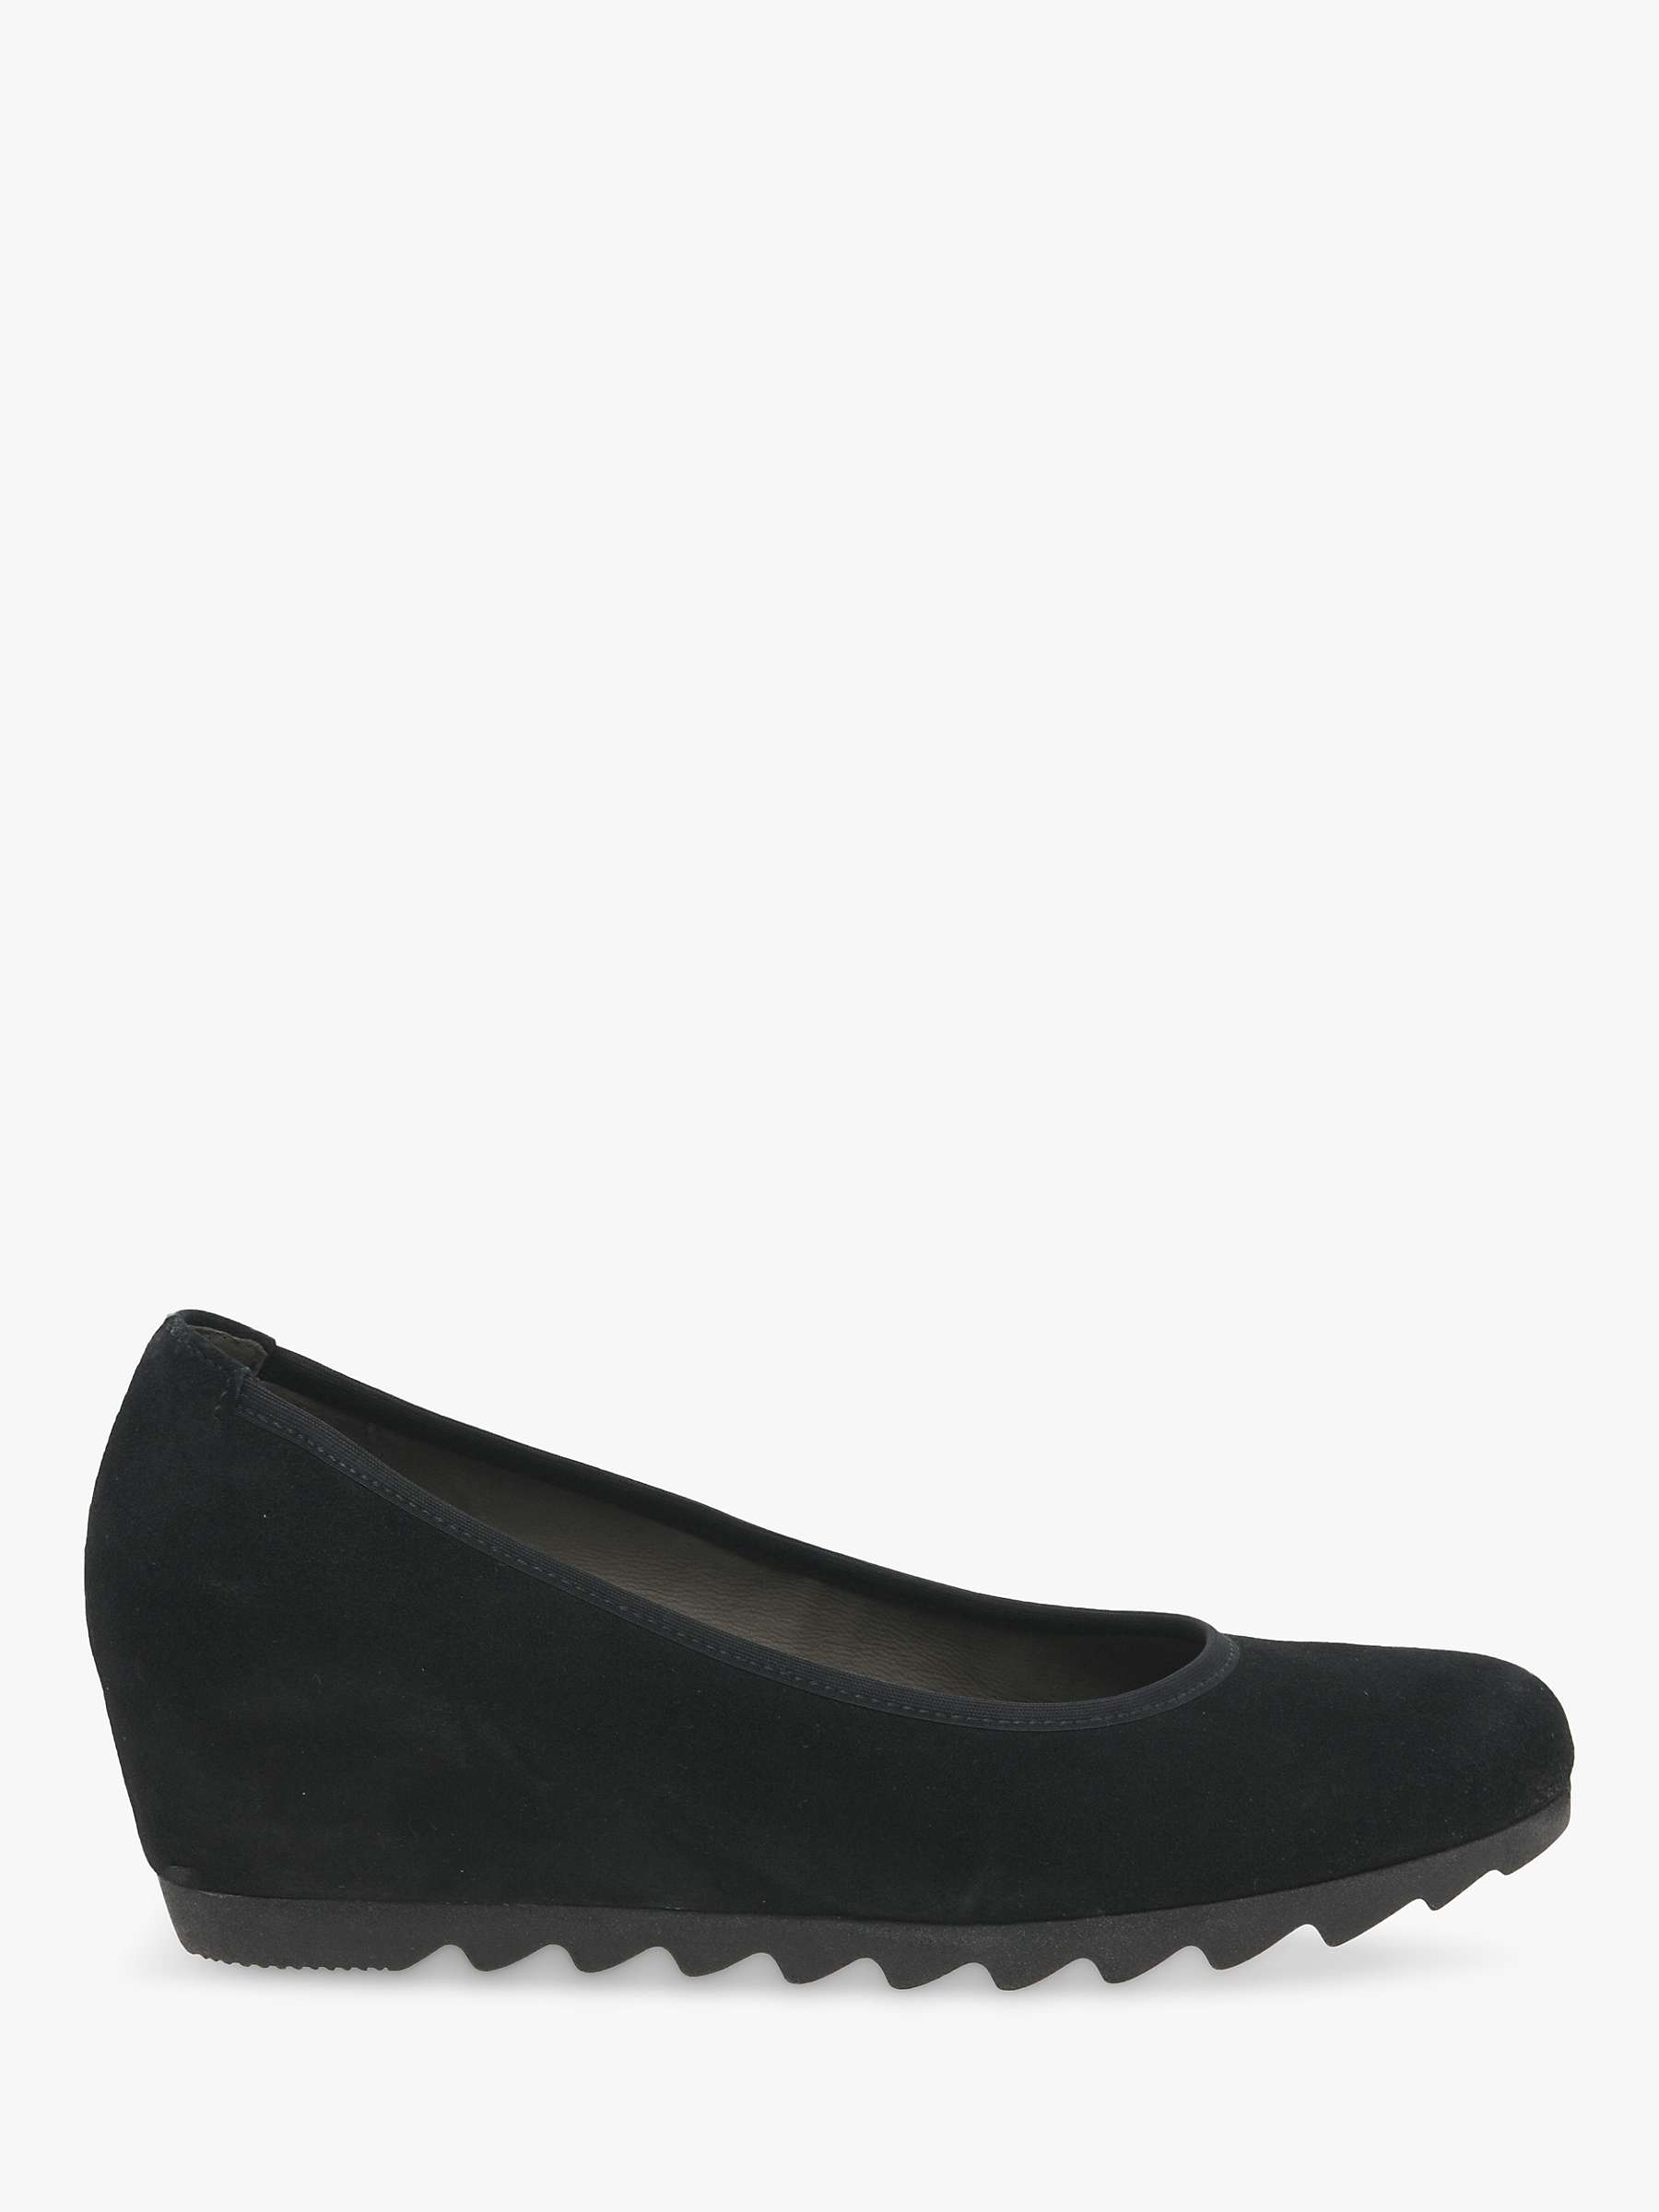 Request Suede Wedge Court Shoes, Black at Lewis & Partners